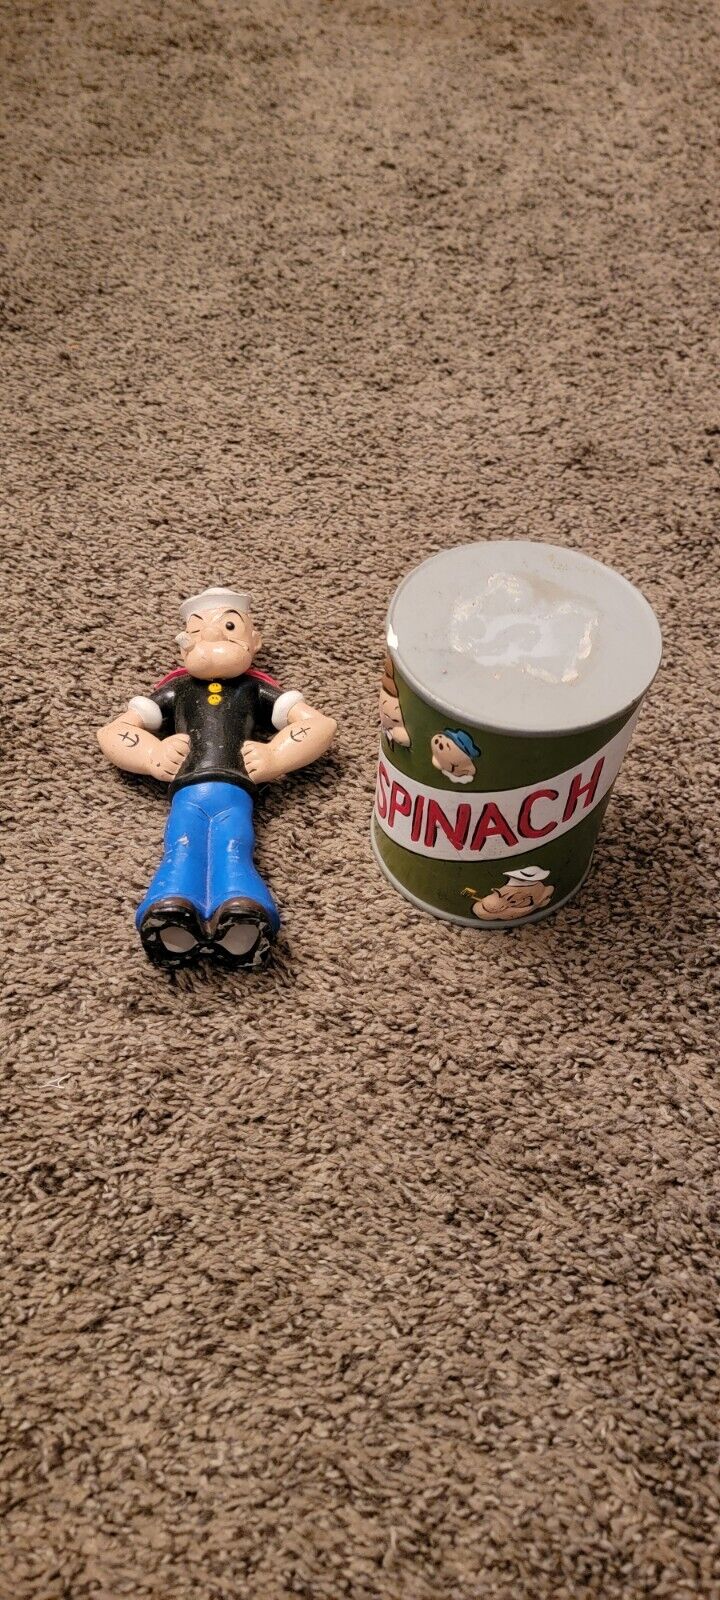 Vintage 1975 King Syndicate Popeye Spinach Can Ceramic Coin Bank.